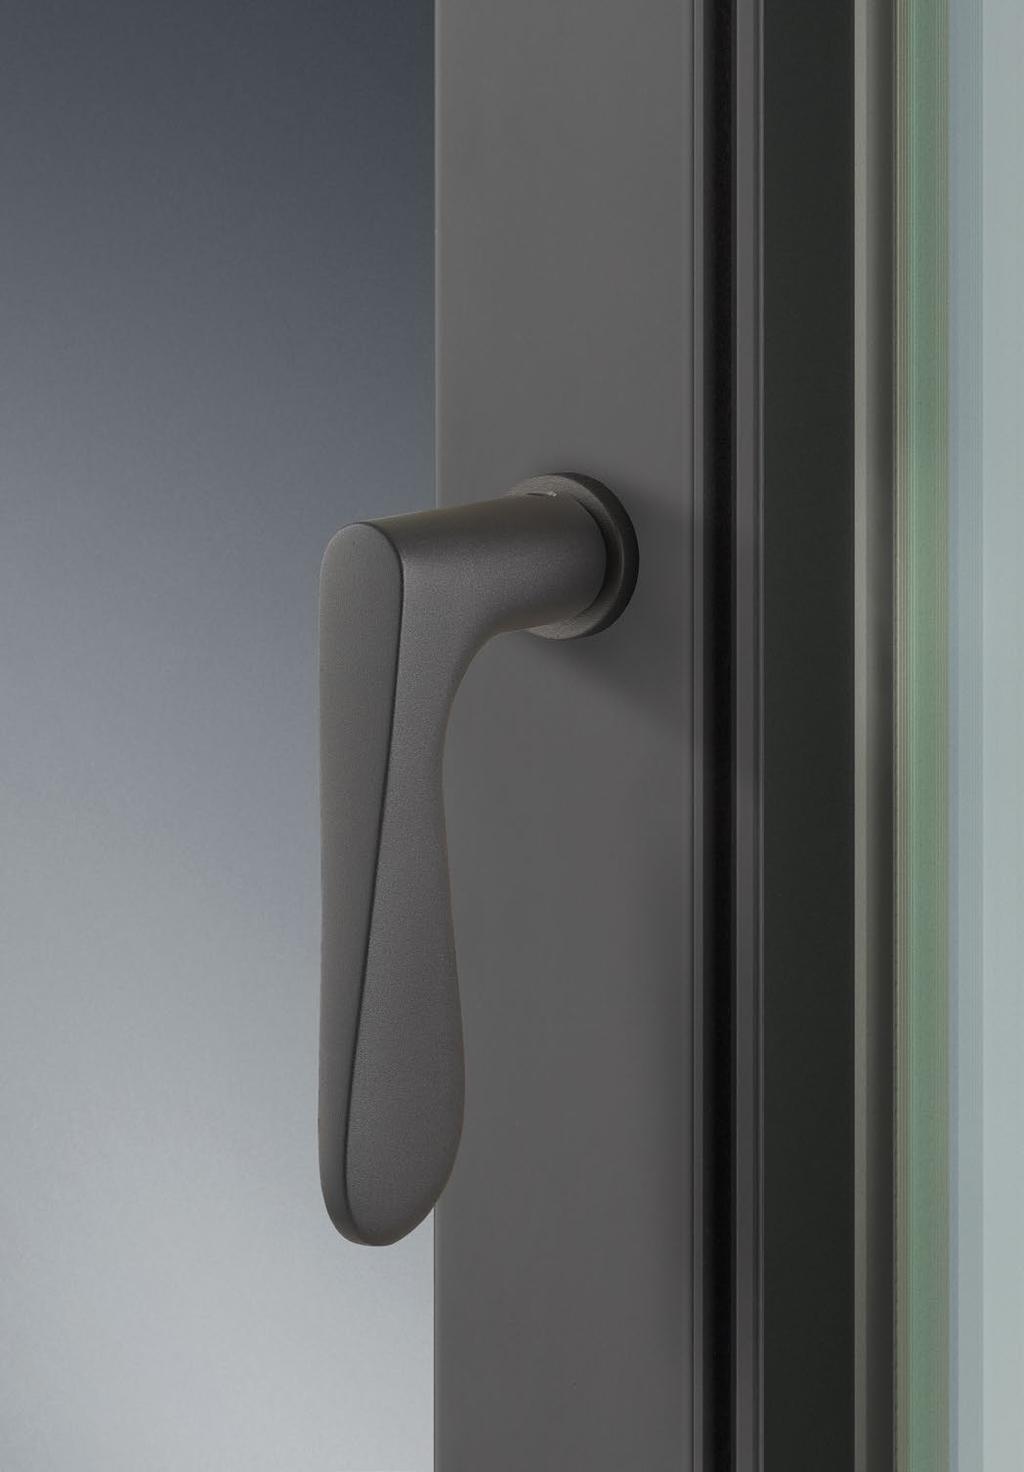 What a difference less can make! With its radically pared-down rose, the FSB plug-in handle is ideal for nearly any window profile whether timber or metal.